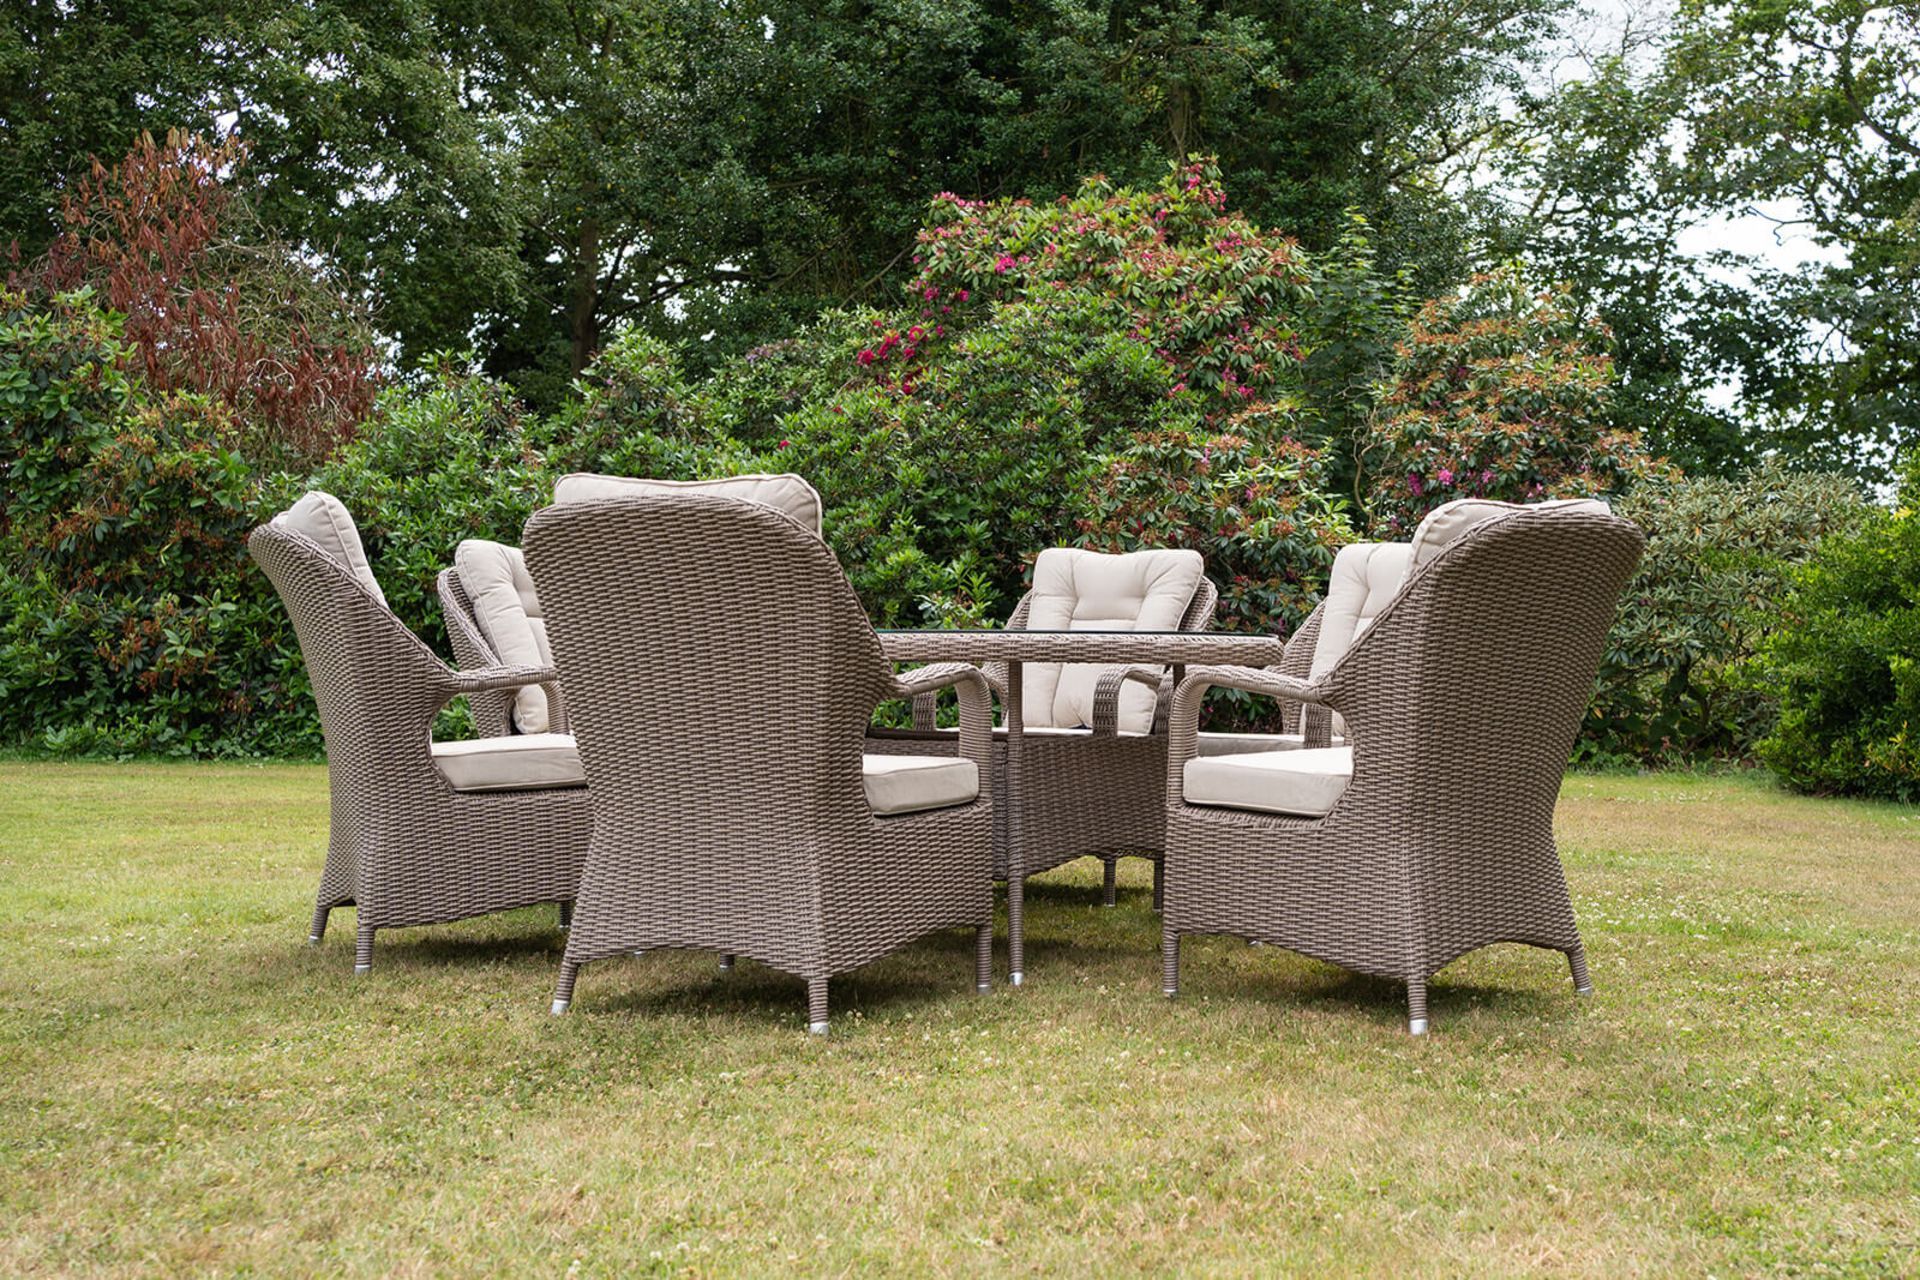 Brand New Moda Furniture 6 Seater Oval Outdoor Dining Set in Natural With Cream Cushions. RRP £ - Image 3 of 8